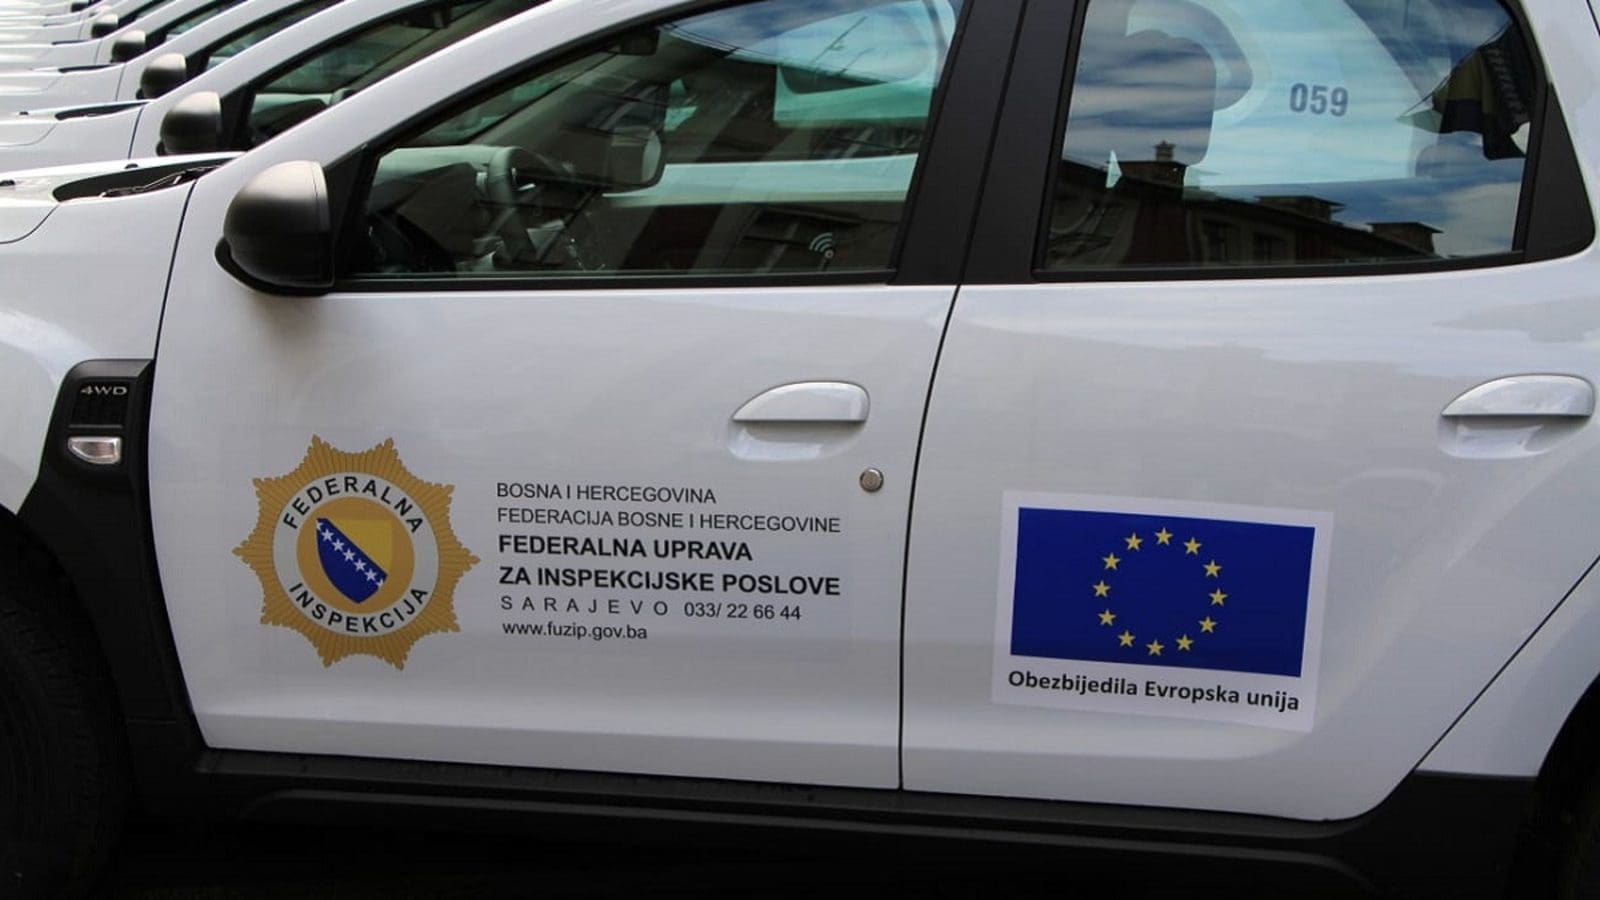 European Union furnishes Bosnia with vehicles for phytosanitary inspections